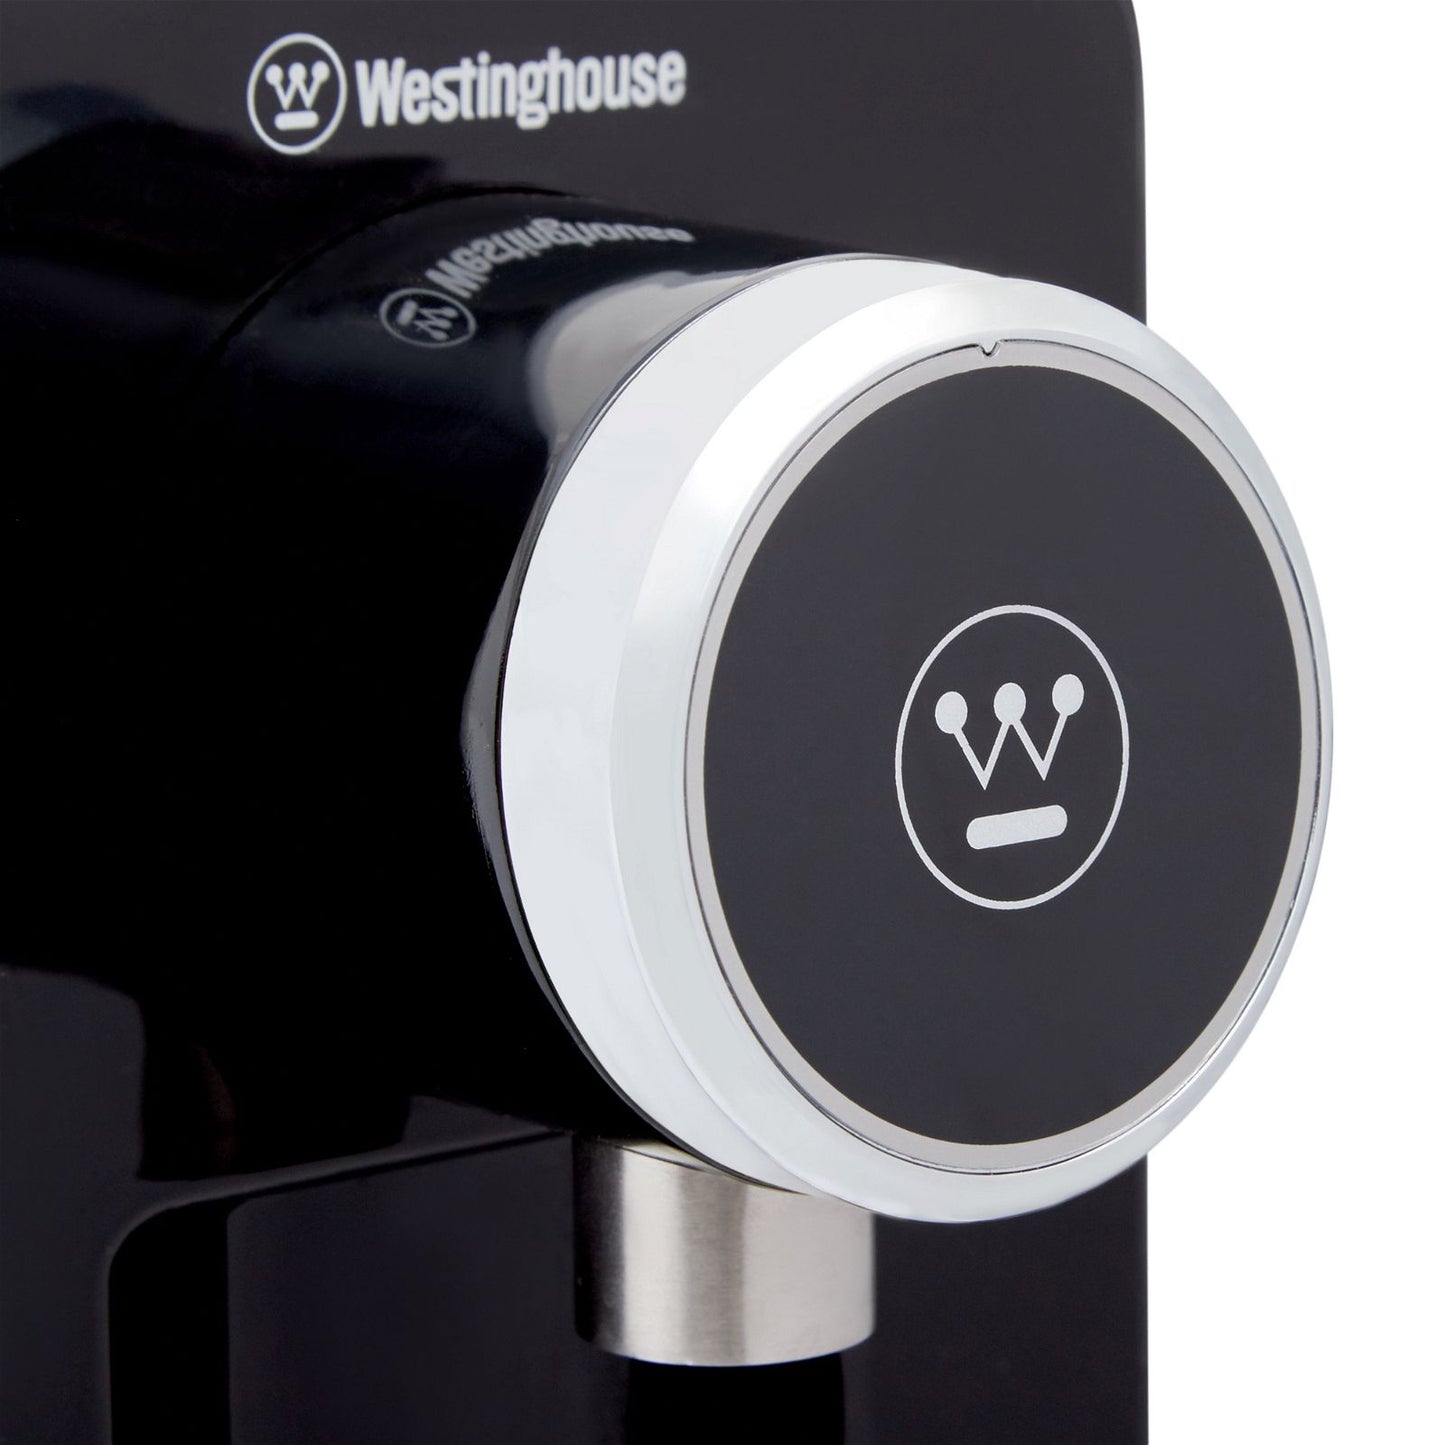 Westinghouse Instant Hot Water Dispenser 2.5L Black-#product_category#- Distributed by:  under license